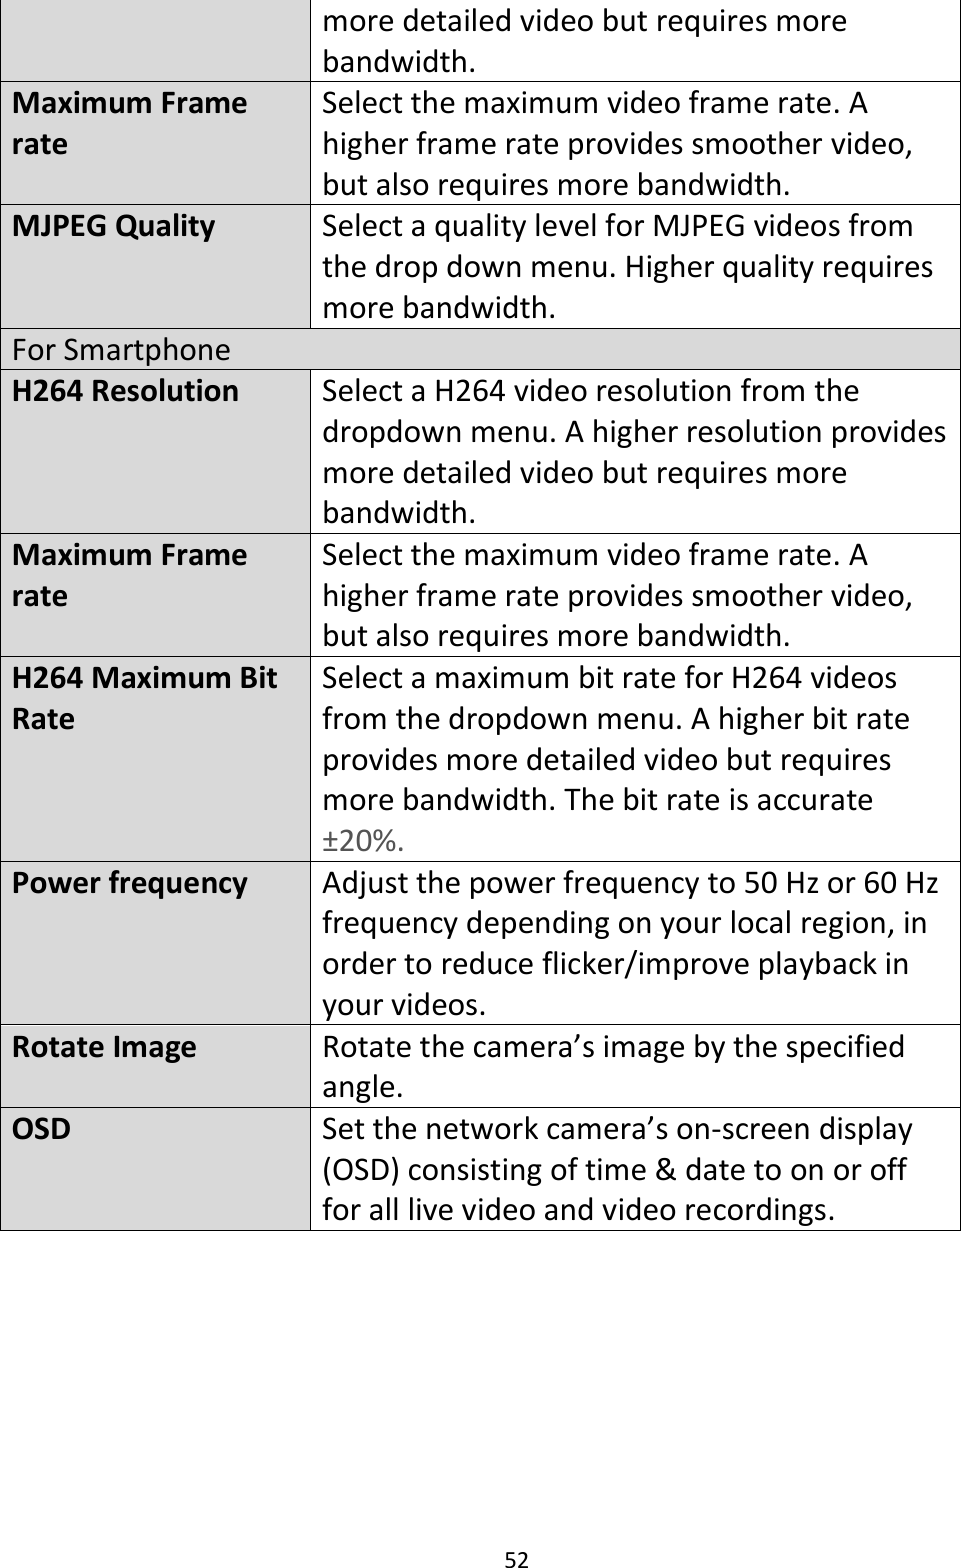 52  more detailed video but requires more bandwidth. Maximum Frame rate Select the maximum video frame rate. A higher frame rate provides smoother video, but also requires more bandwidth. MJPEG Quality Select a quality level for MJPEG videos from the drop down menu. Higher quality requires more bandwidth. For Smartphone H264 Resolution Select a H264 video resolution from the dropdown menu. A higher resolution provides more detailed video but requires more bandwidth. Maximum Frame rate Select the maximum video frame rate. A higher frame rate provides smoother video, but also requires more bandwidth. H264 Maximum Bit Rate Select a maximum bit rate for H264 videos from the dropdown menu. A higher bit rate provides more detailed video but requires more bandwidth. The bit rate is accurate ±20%. Power frequency Adjust the power frequency to 50 Hz or 60 Hz frequency depending on your local region, in order to reduce flicker/improve playback in your videos. Rotate Image Rotate the camera’s image by the specified angle. OSD Set the network camera’s on-screen display (OSD) consisting of time &amp; date to on or off for all live video and video recordings.     